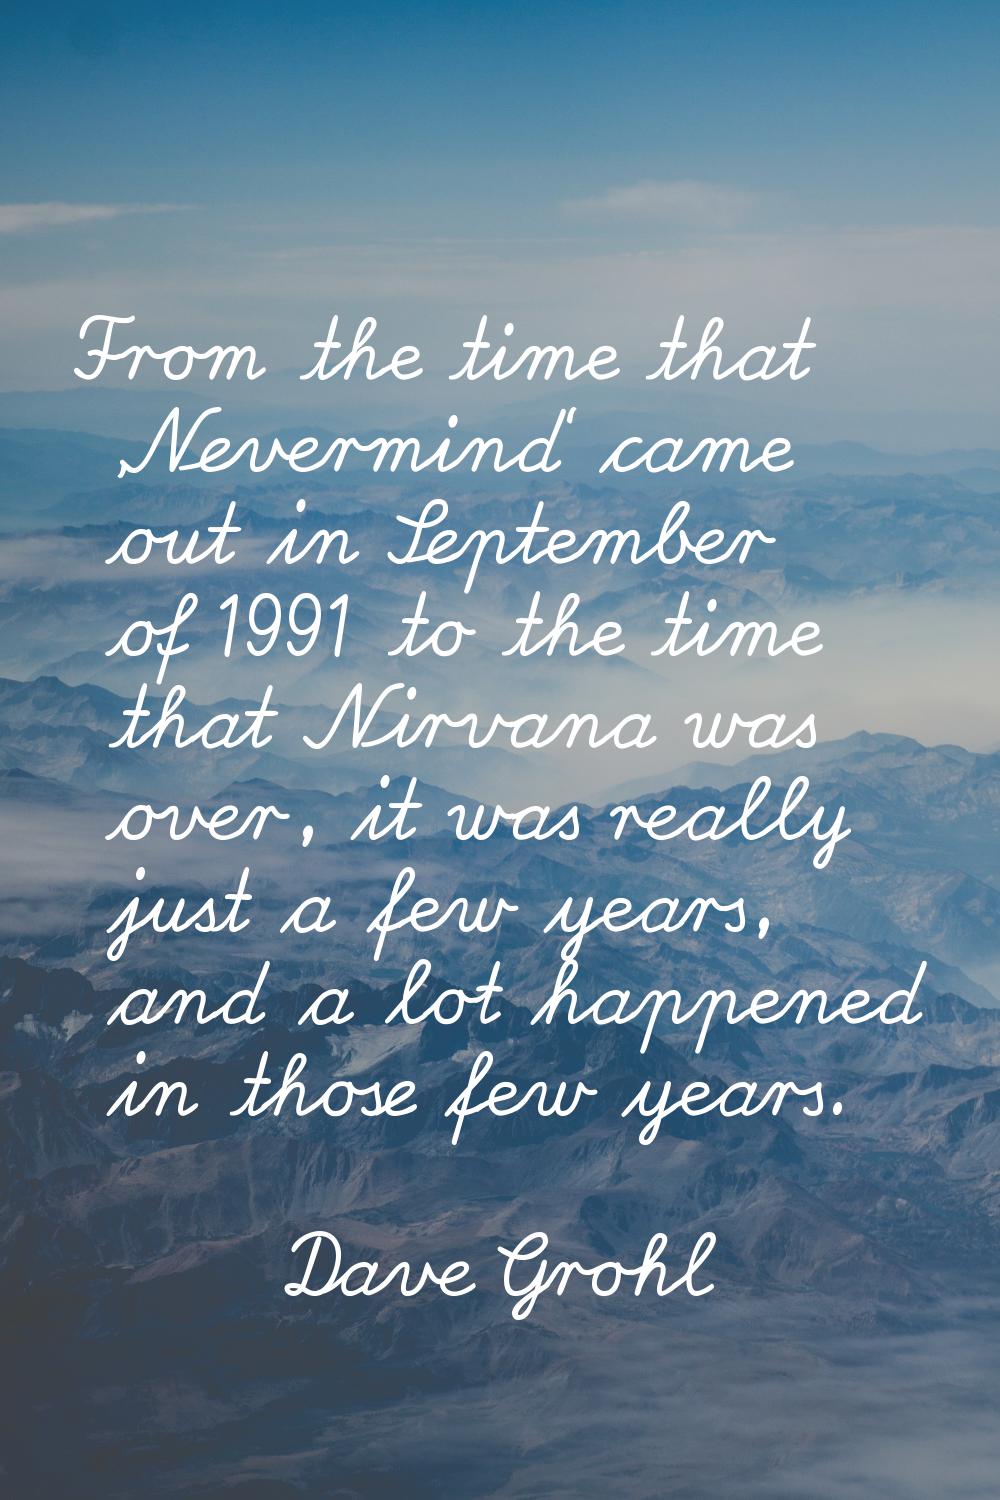 From the time that 'Nevermind' came out in September of 1991 to the time that Nirvana was over, it 